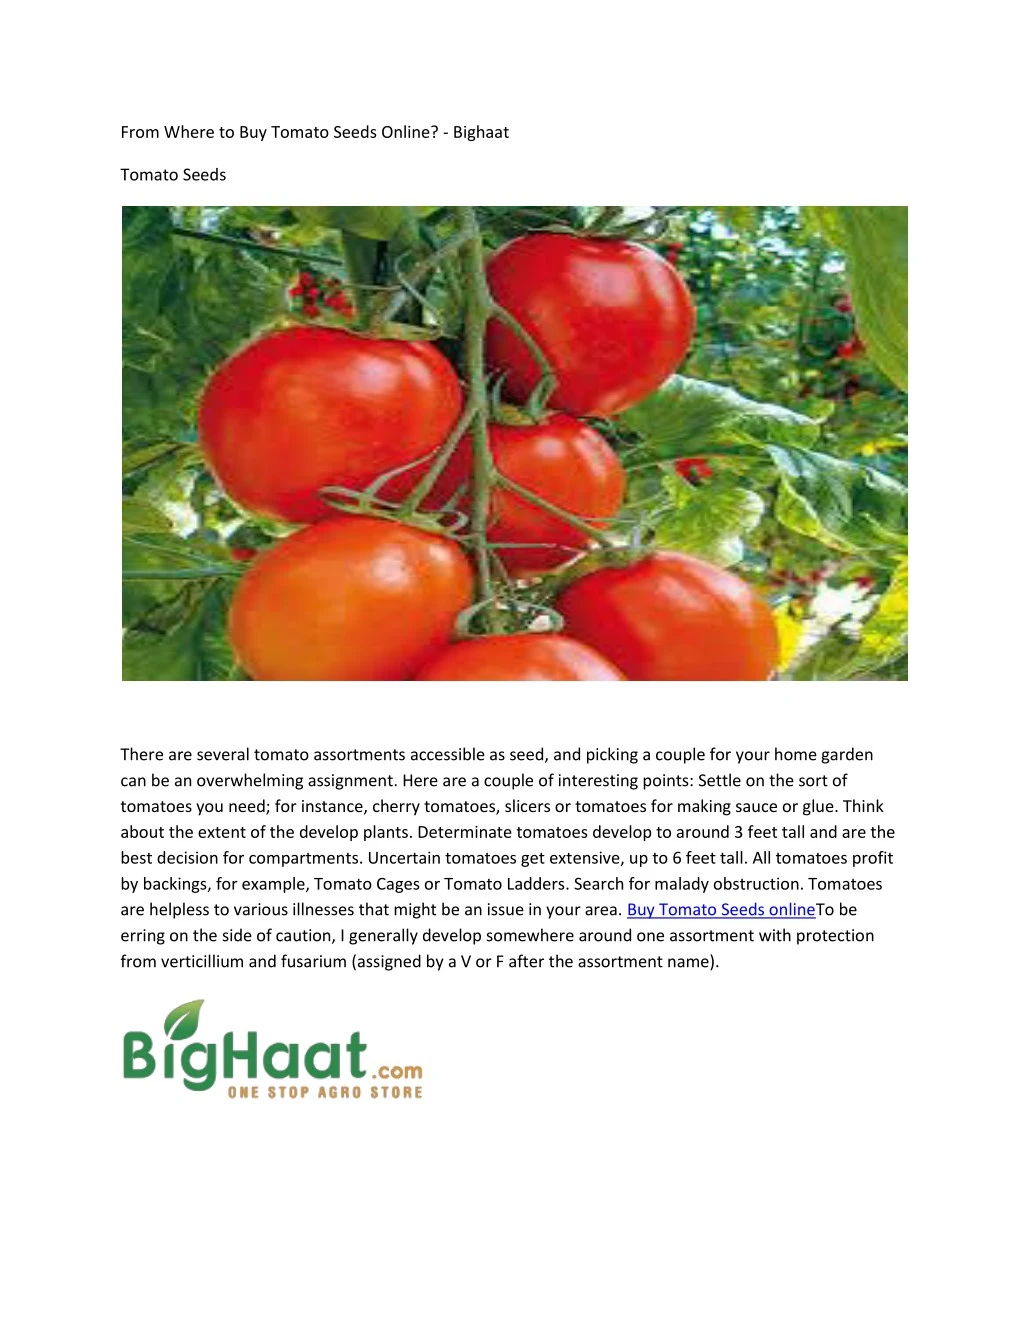 from where to buy tomato seeds online bighaat